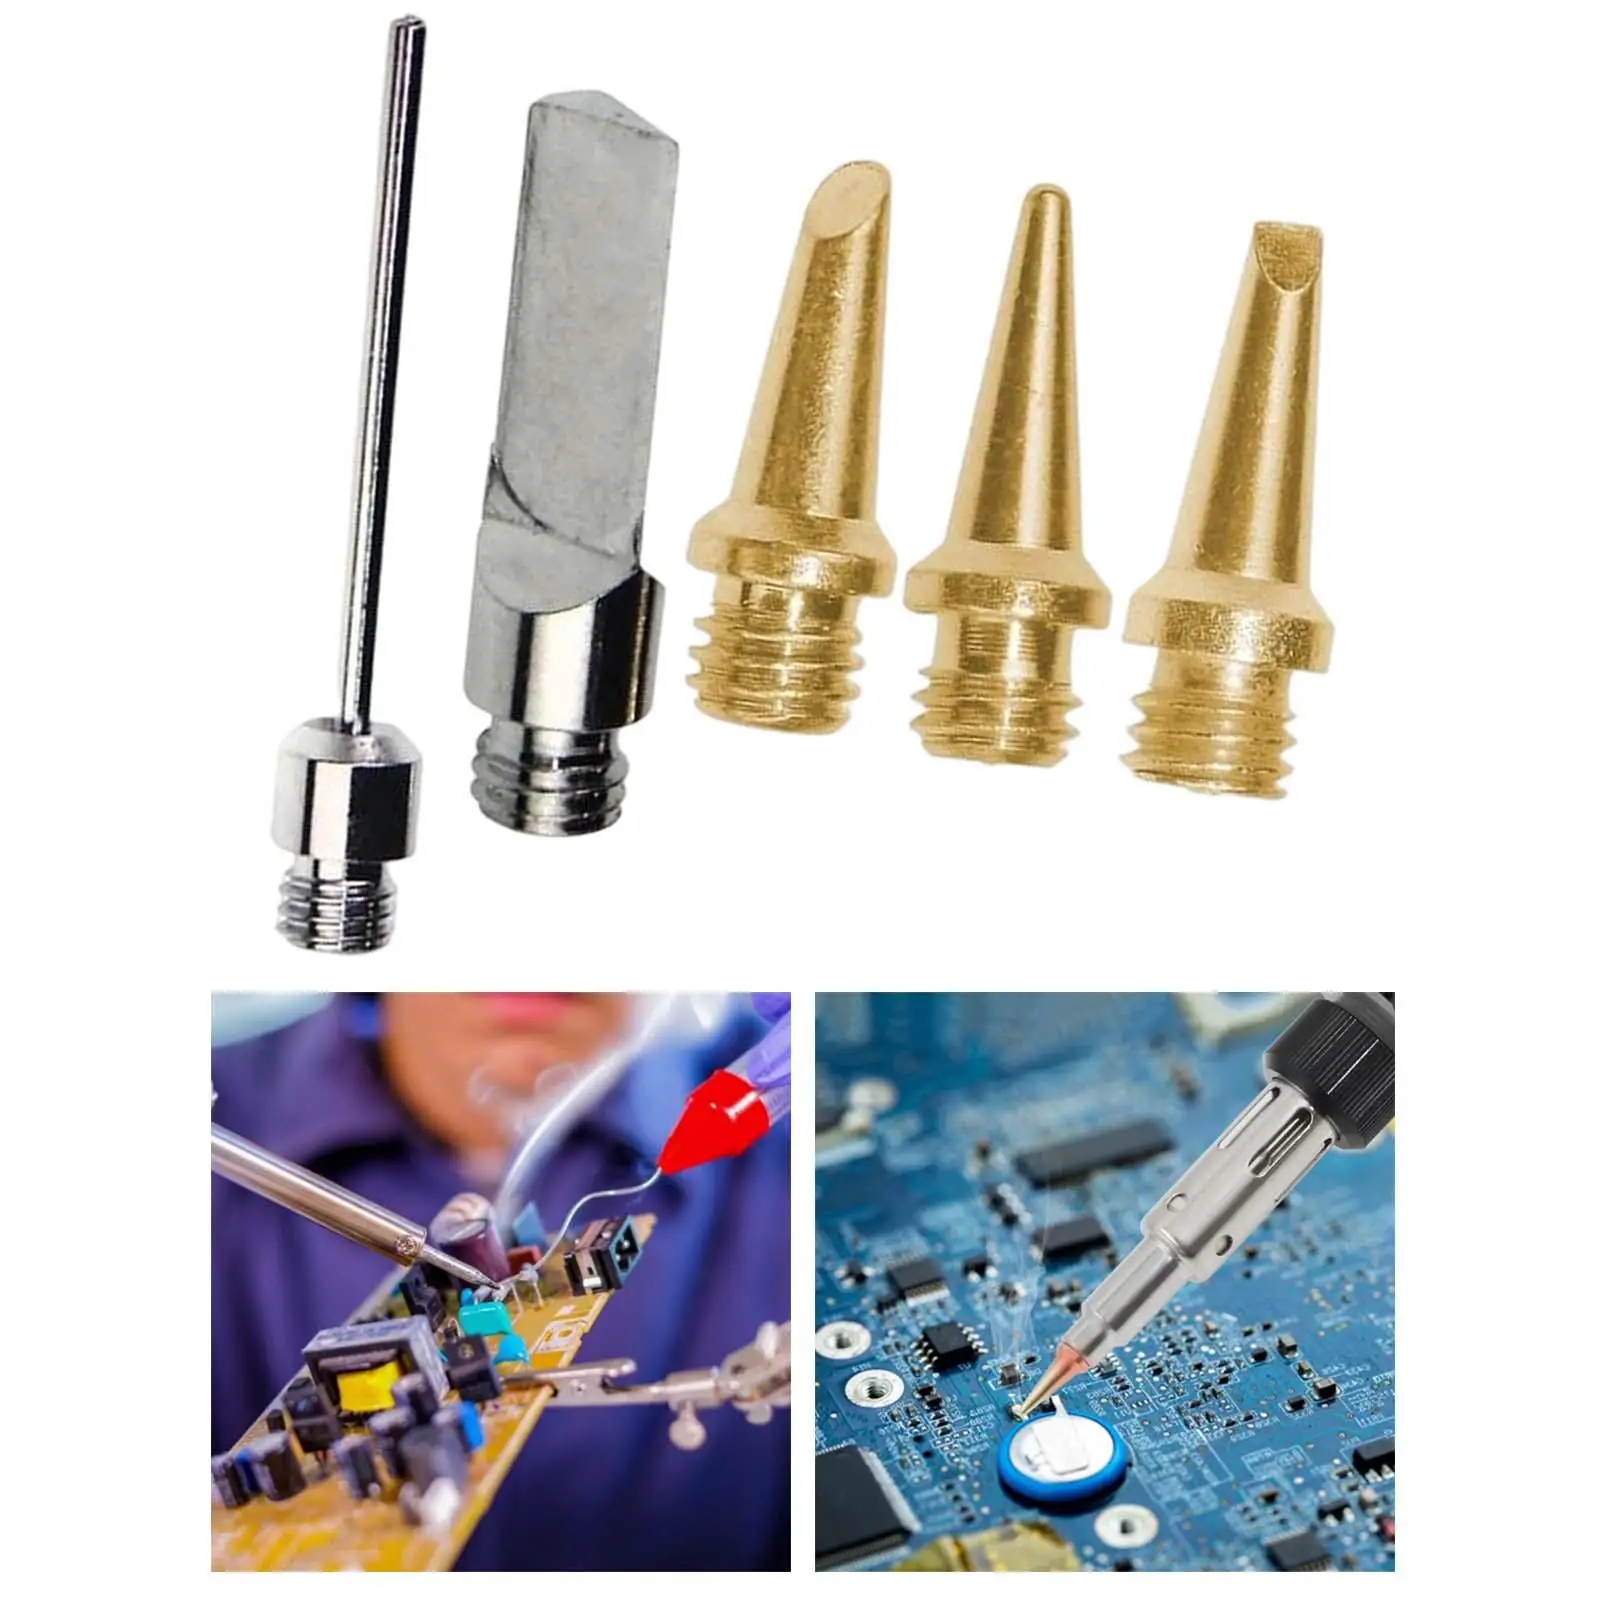 5 Pieces Metal Soldering Iron Tips Kit Soldering Station Torch Pen Tool